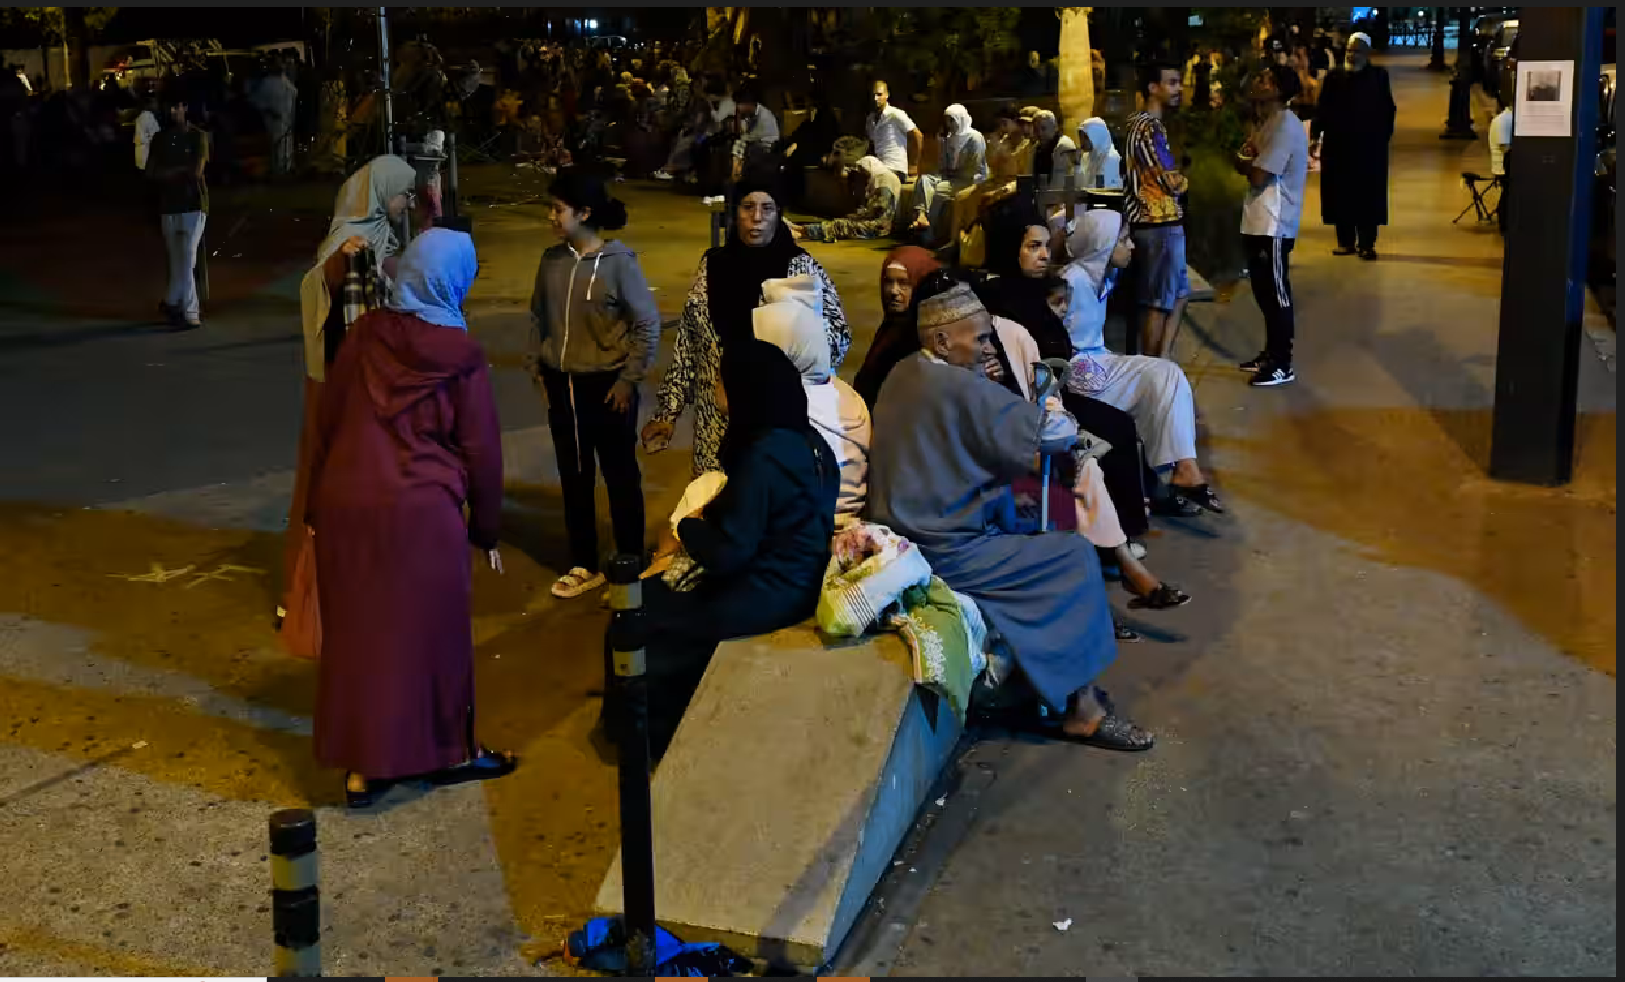 Devastating 6.8 Magnitude Earthquake Claims Over 800 Lives in Morocco: Egypt Expresses Solidarity Condolences Extended The Egyptian Ministry of Foreign Affairs expressed condolences to the Kingdom of Morocco following a destructive 6.8 magnitude earthquake that struck the High Atlas Mountain range on Friday night.